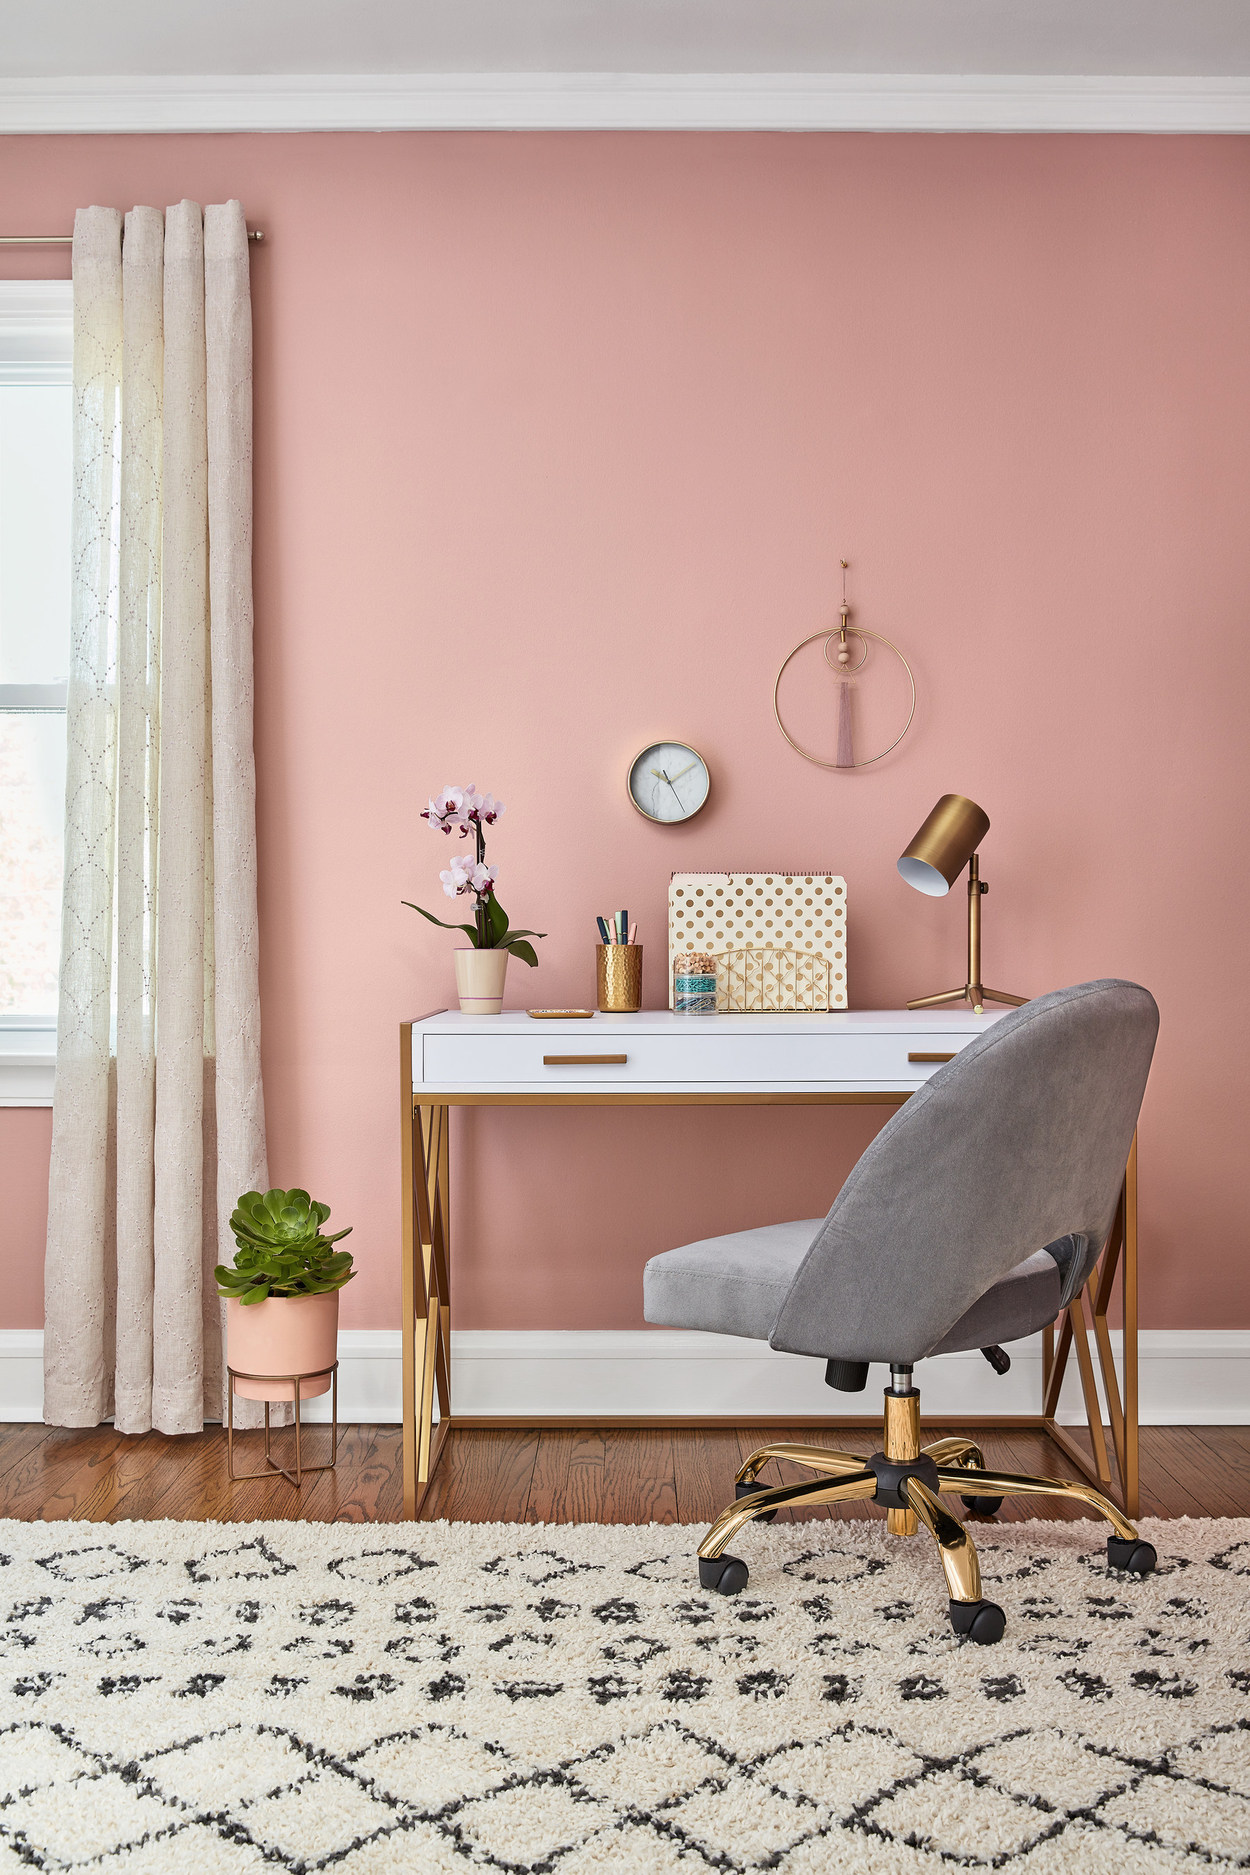 Valspar® Announces 2020 Colors of the Year HowTo Building Center